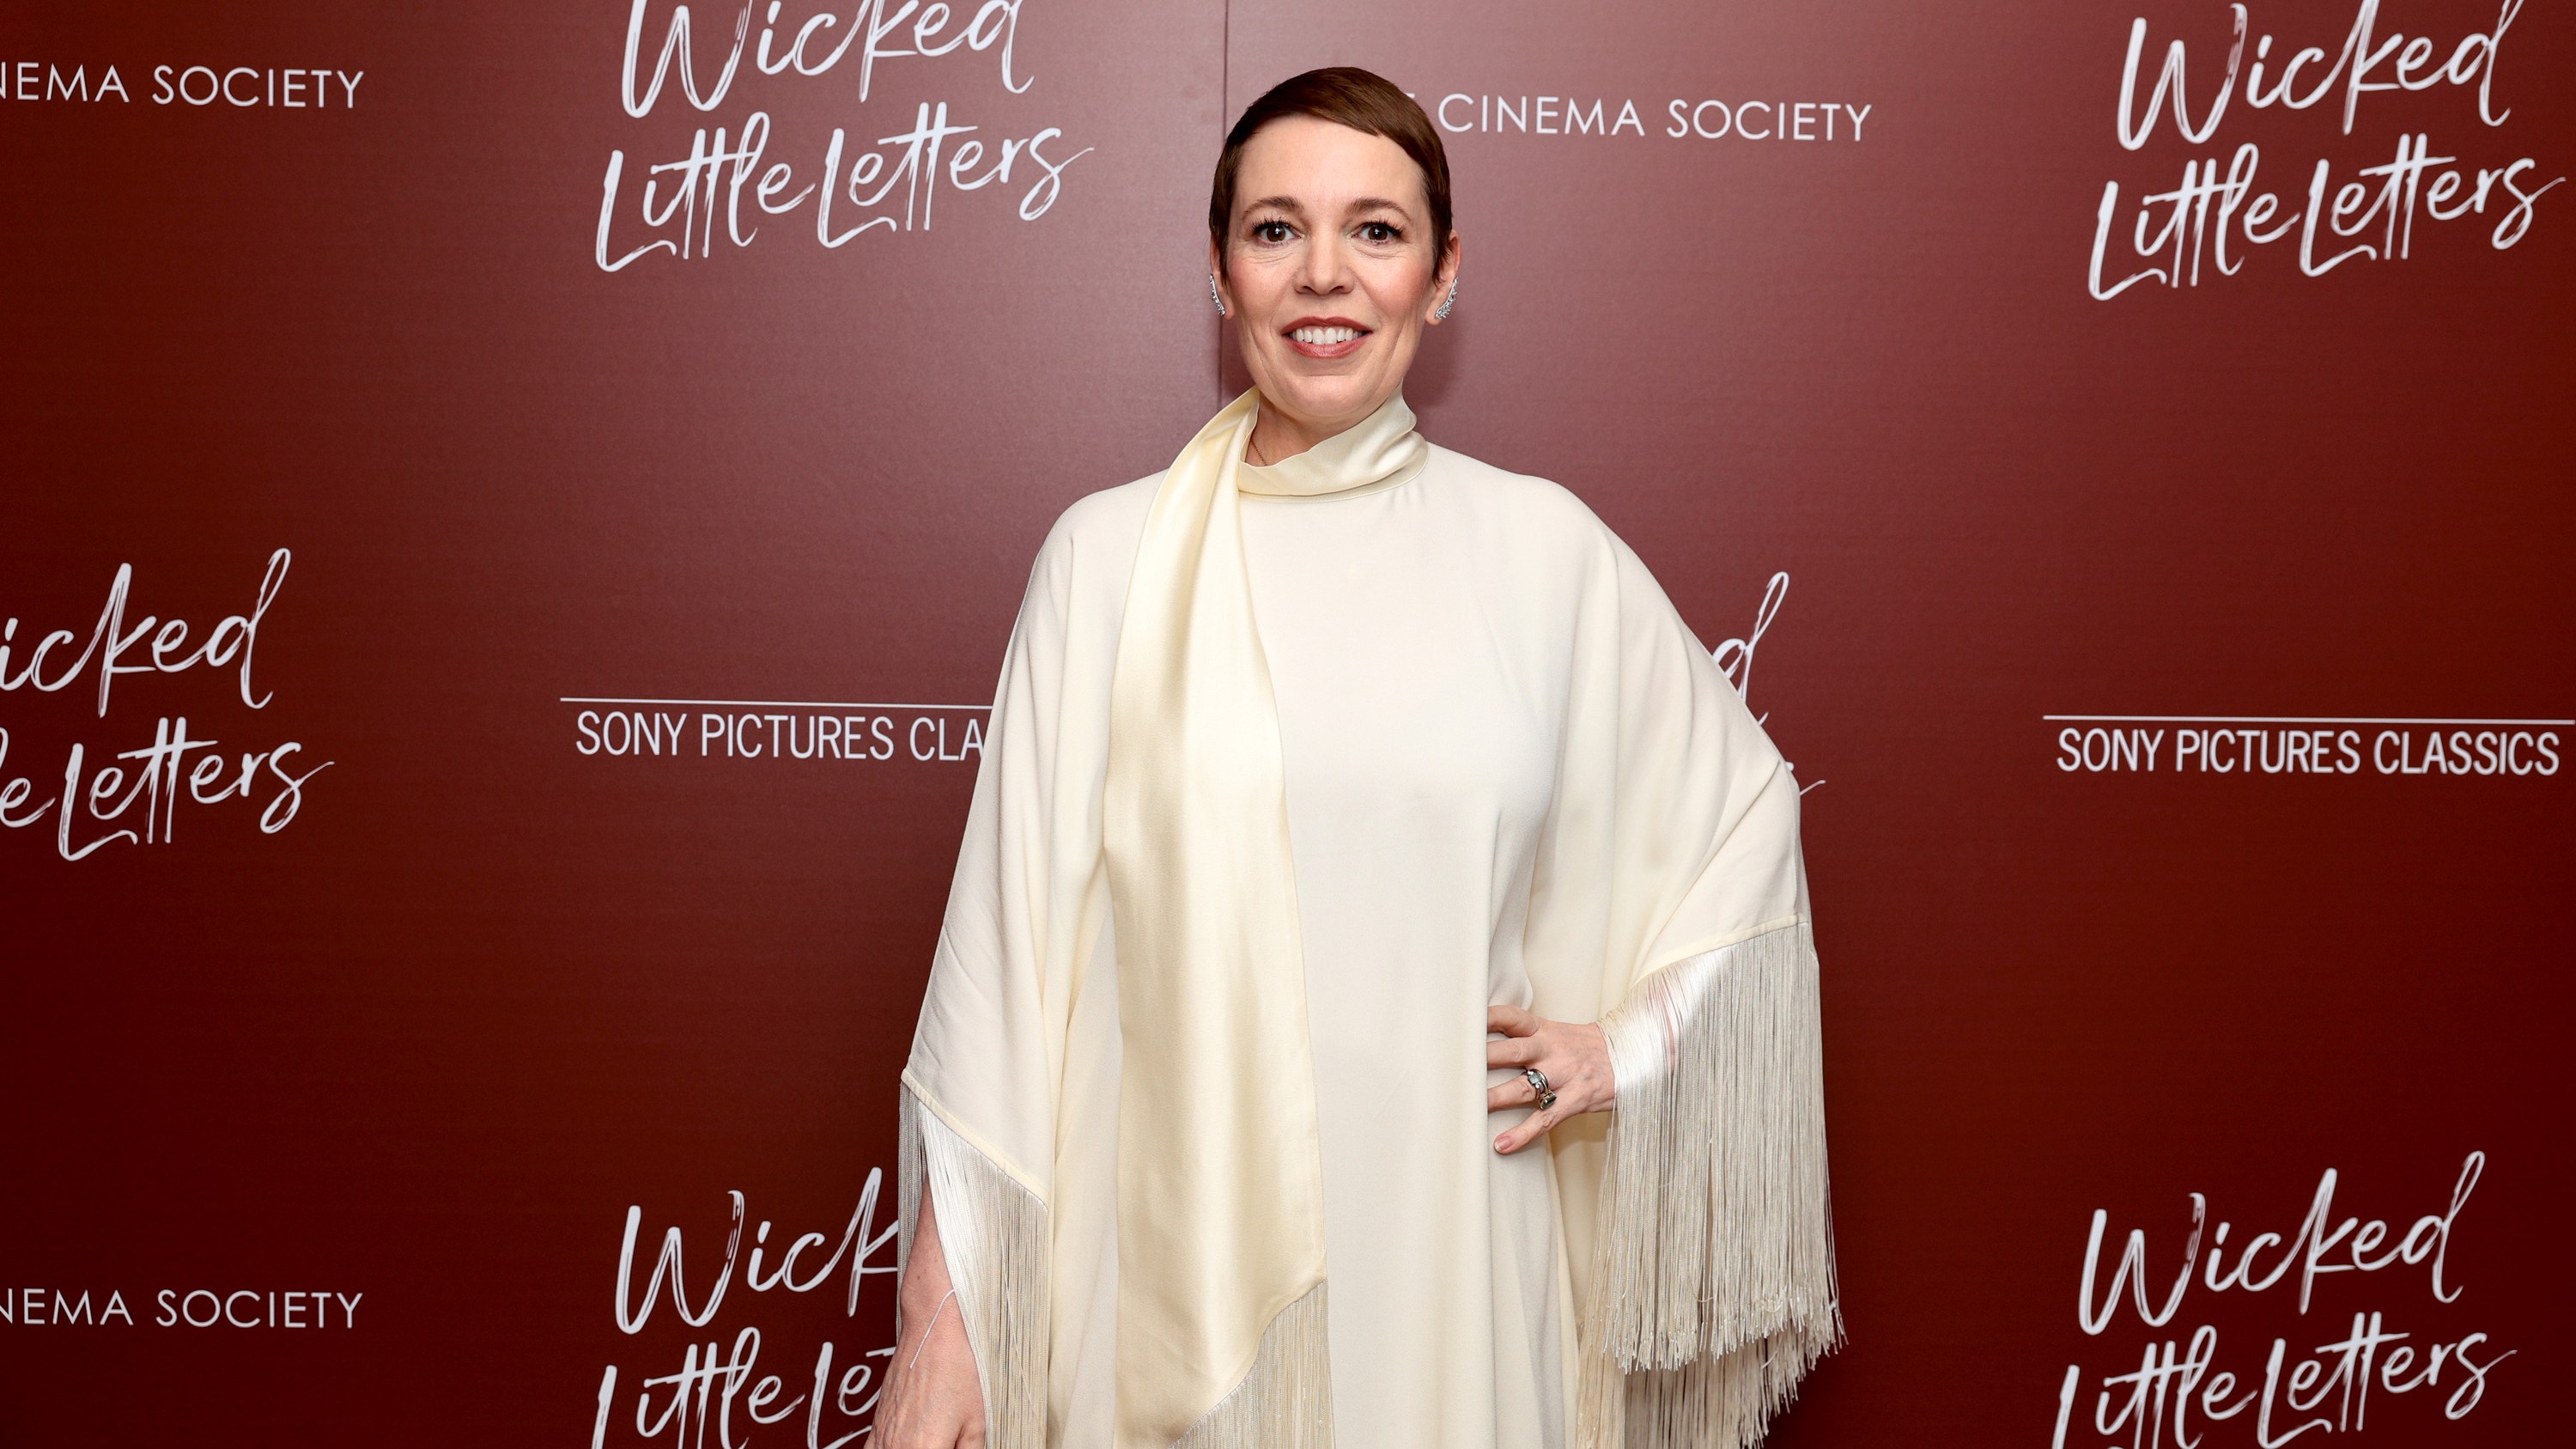 NEW YORK, NEW YORK - MARCH 20: Olivia Colman attends Sony Pictures Classics And The Cinema Society Screening Of "Wicked Little Letters" at Crosby Street Hotel on March 20, 2024 in New York City. (Photo by Dimitrios Kambouris/Getty Images)